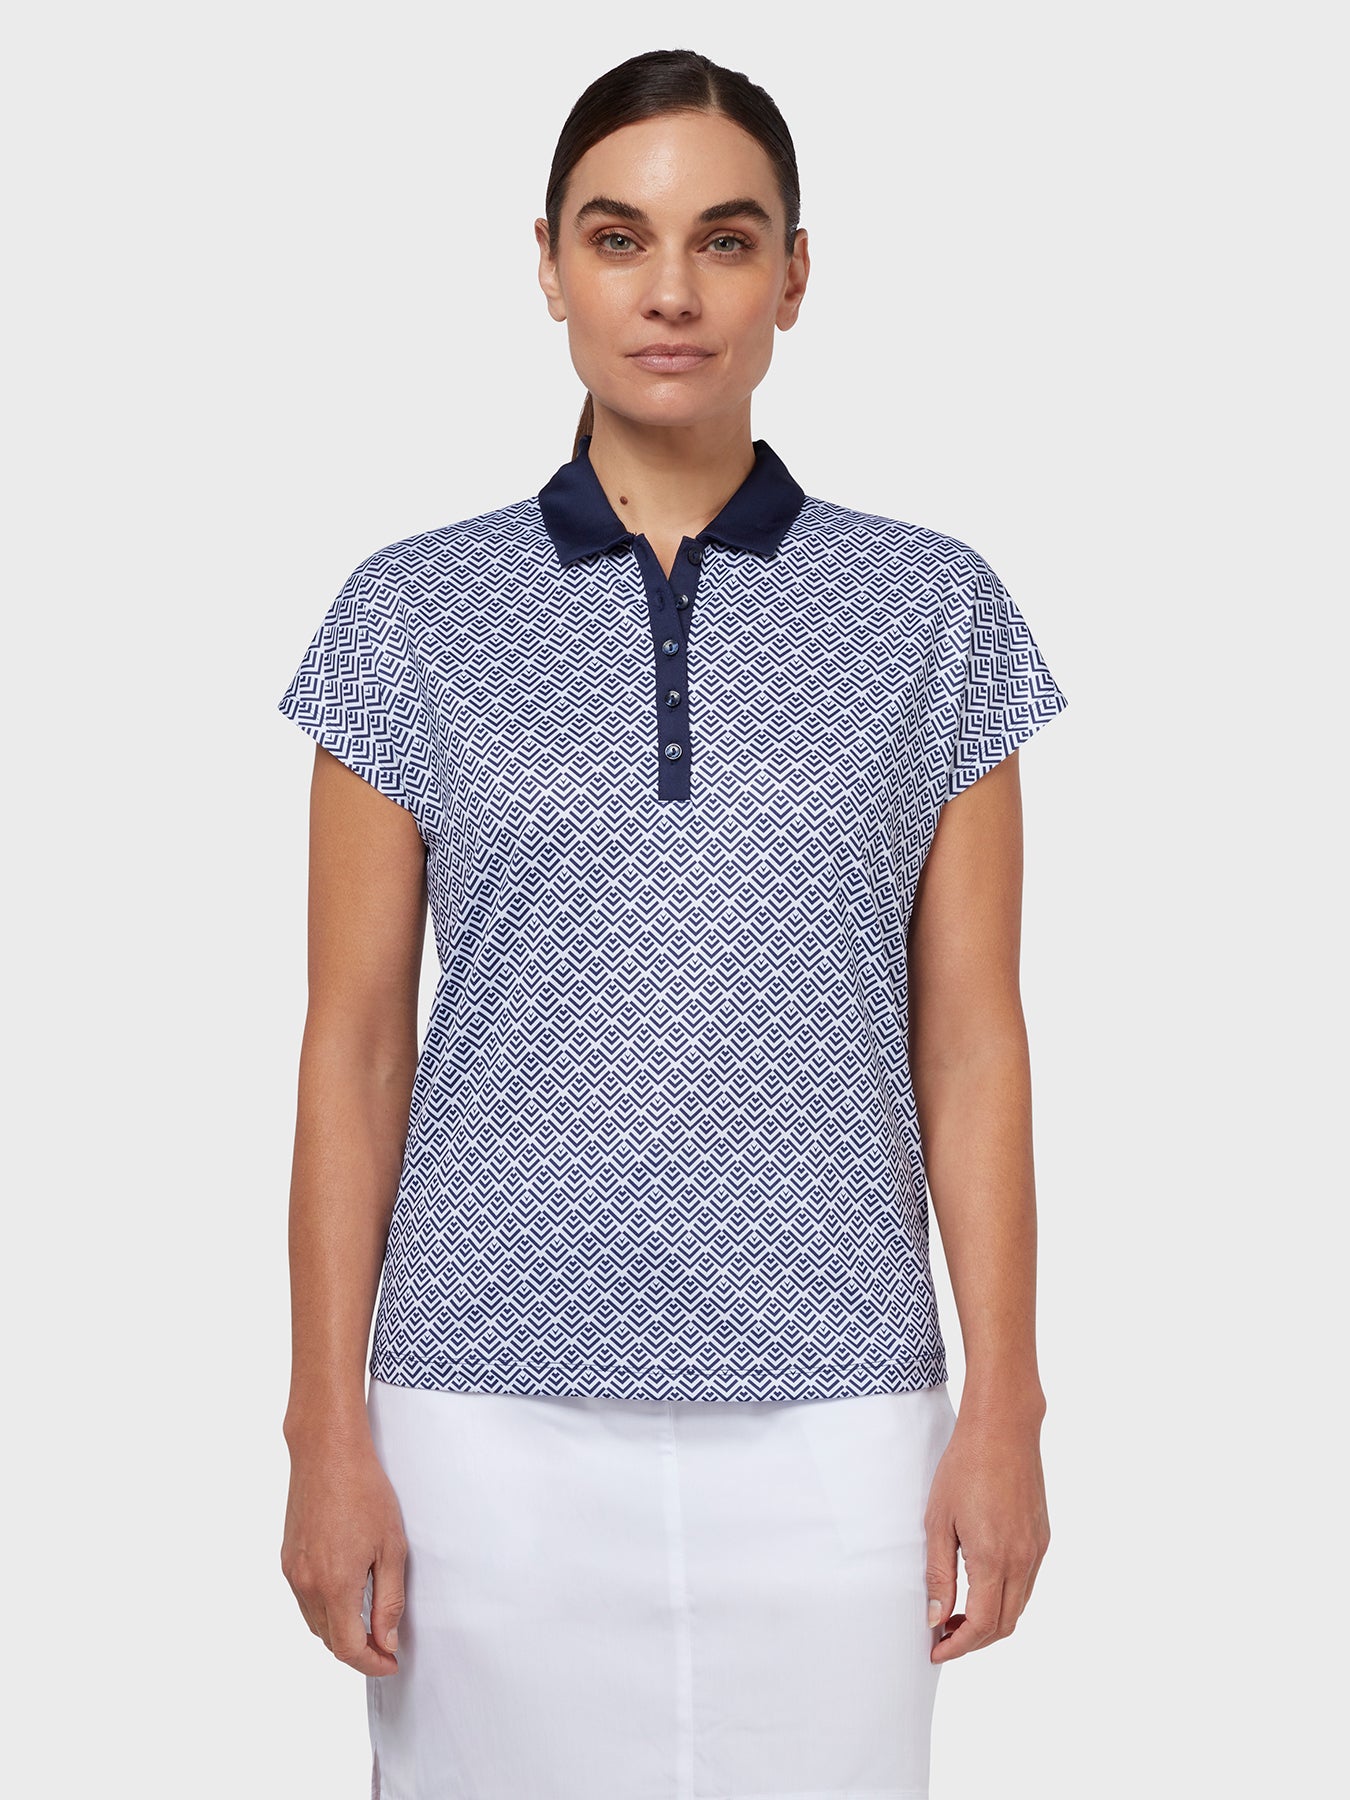 View Chev Printed Womens Polo In Blue Geo Brilliant White S information